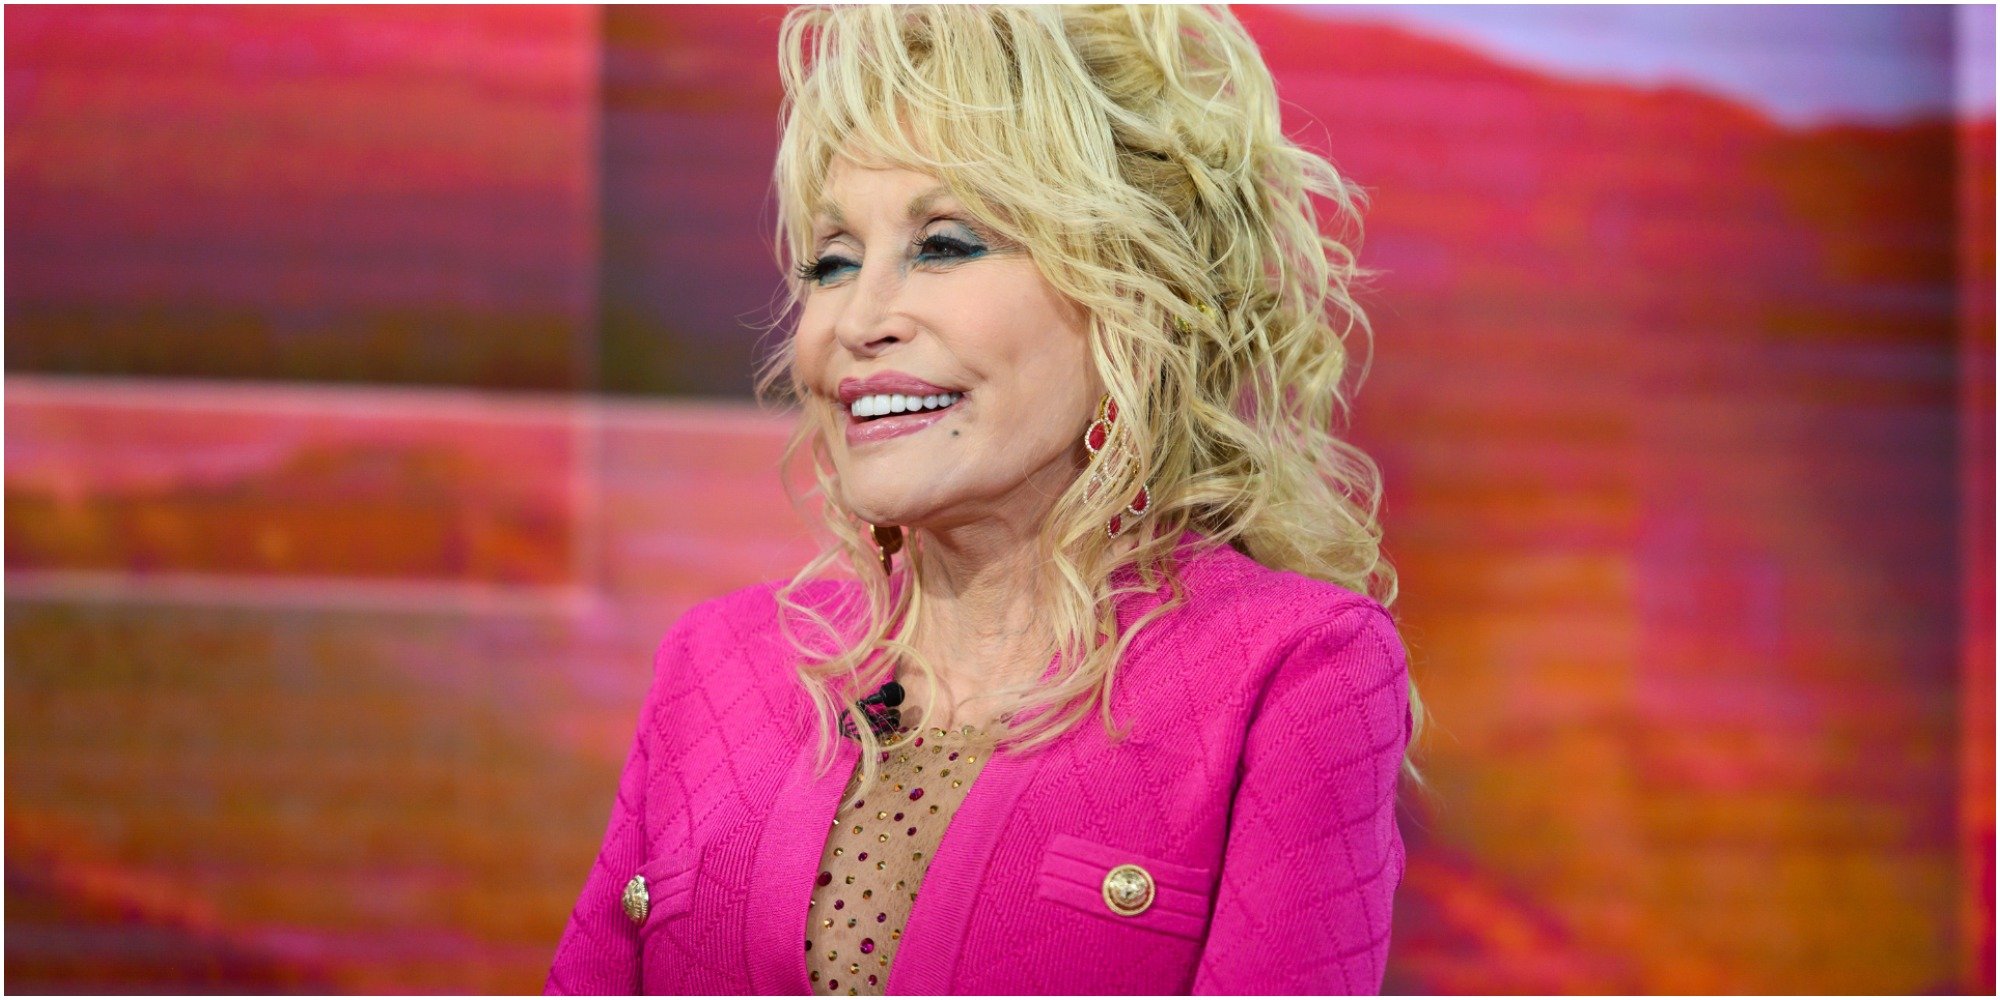 Dolly Parton will present one of the last awards of the Emmy 2021 telecast.